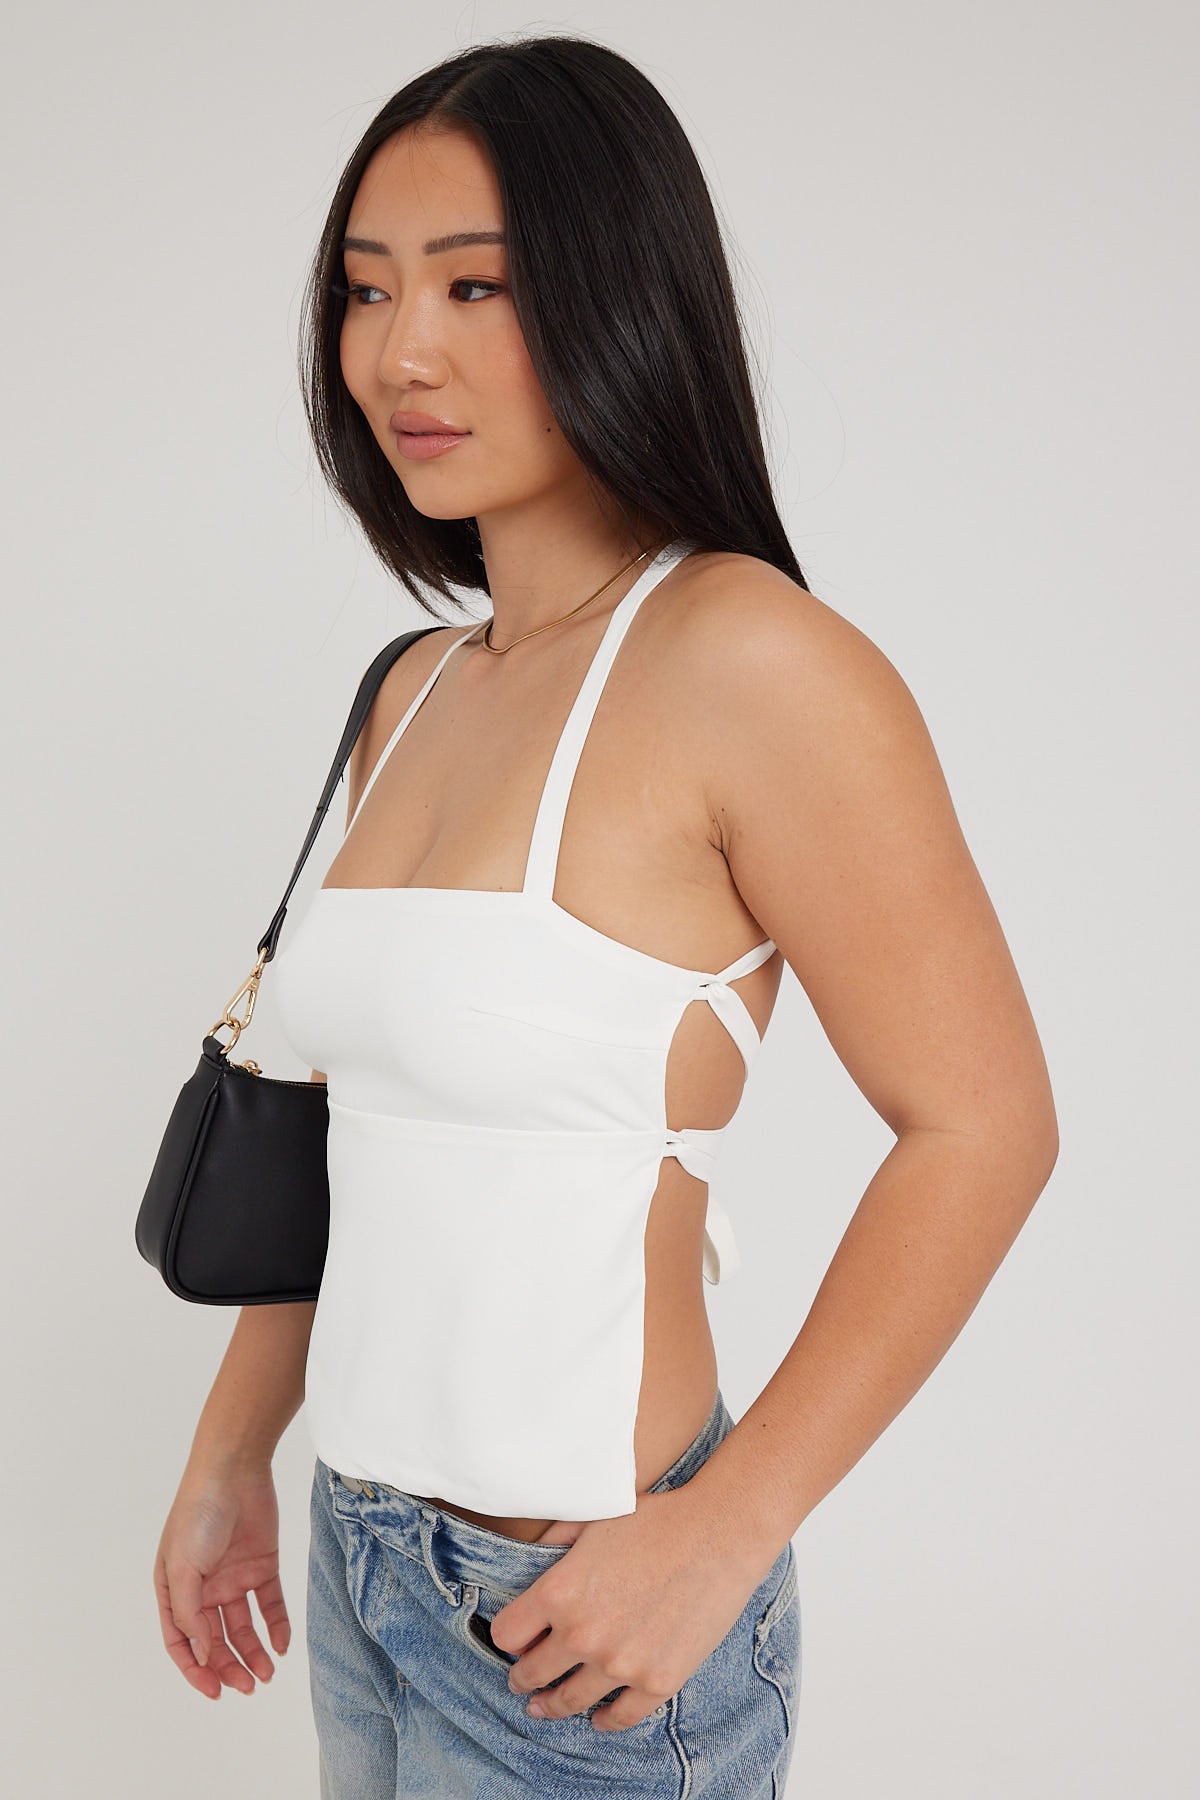 Women's Backless Tops – Universal Store